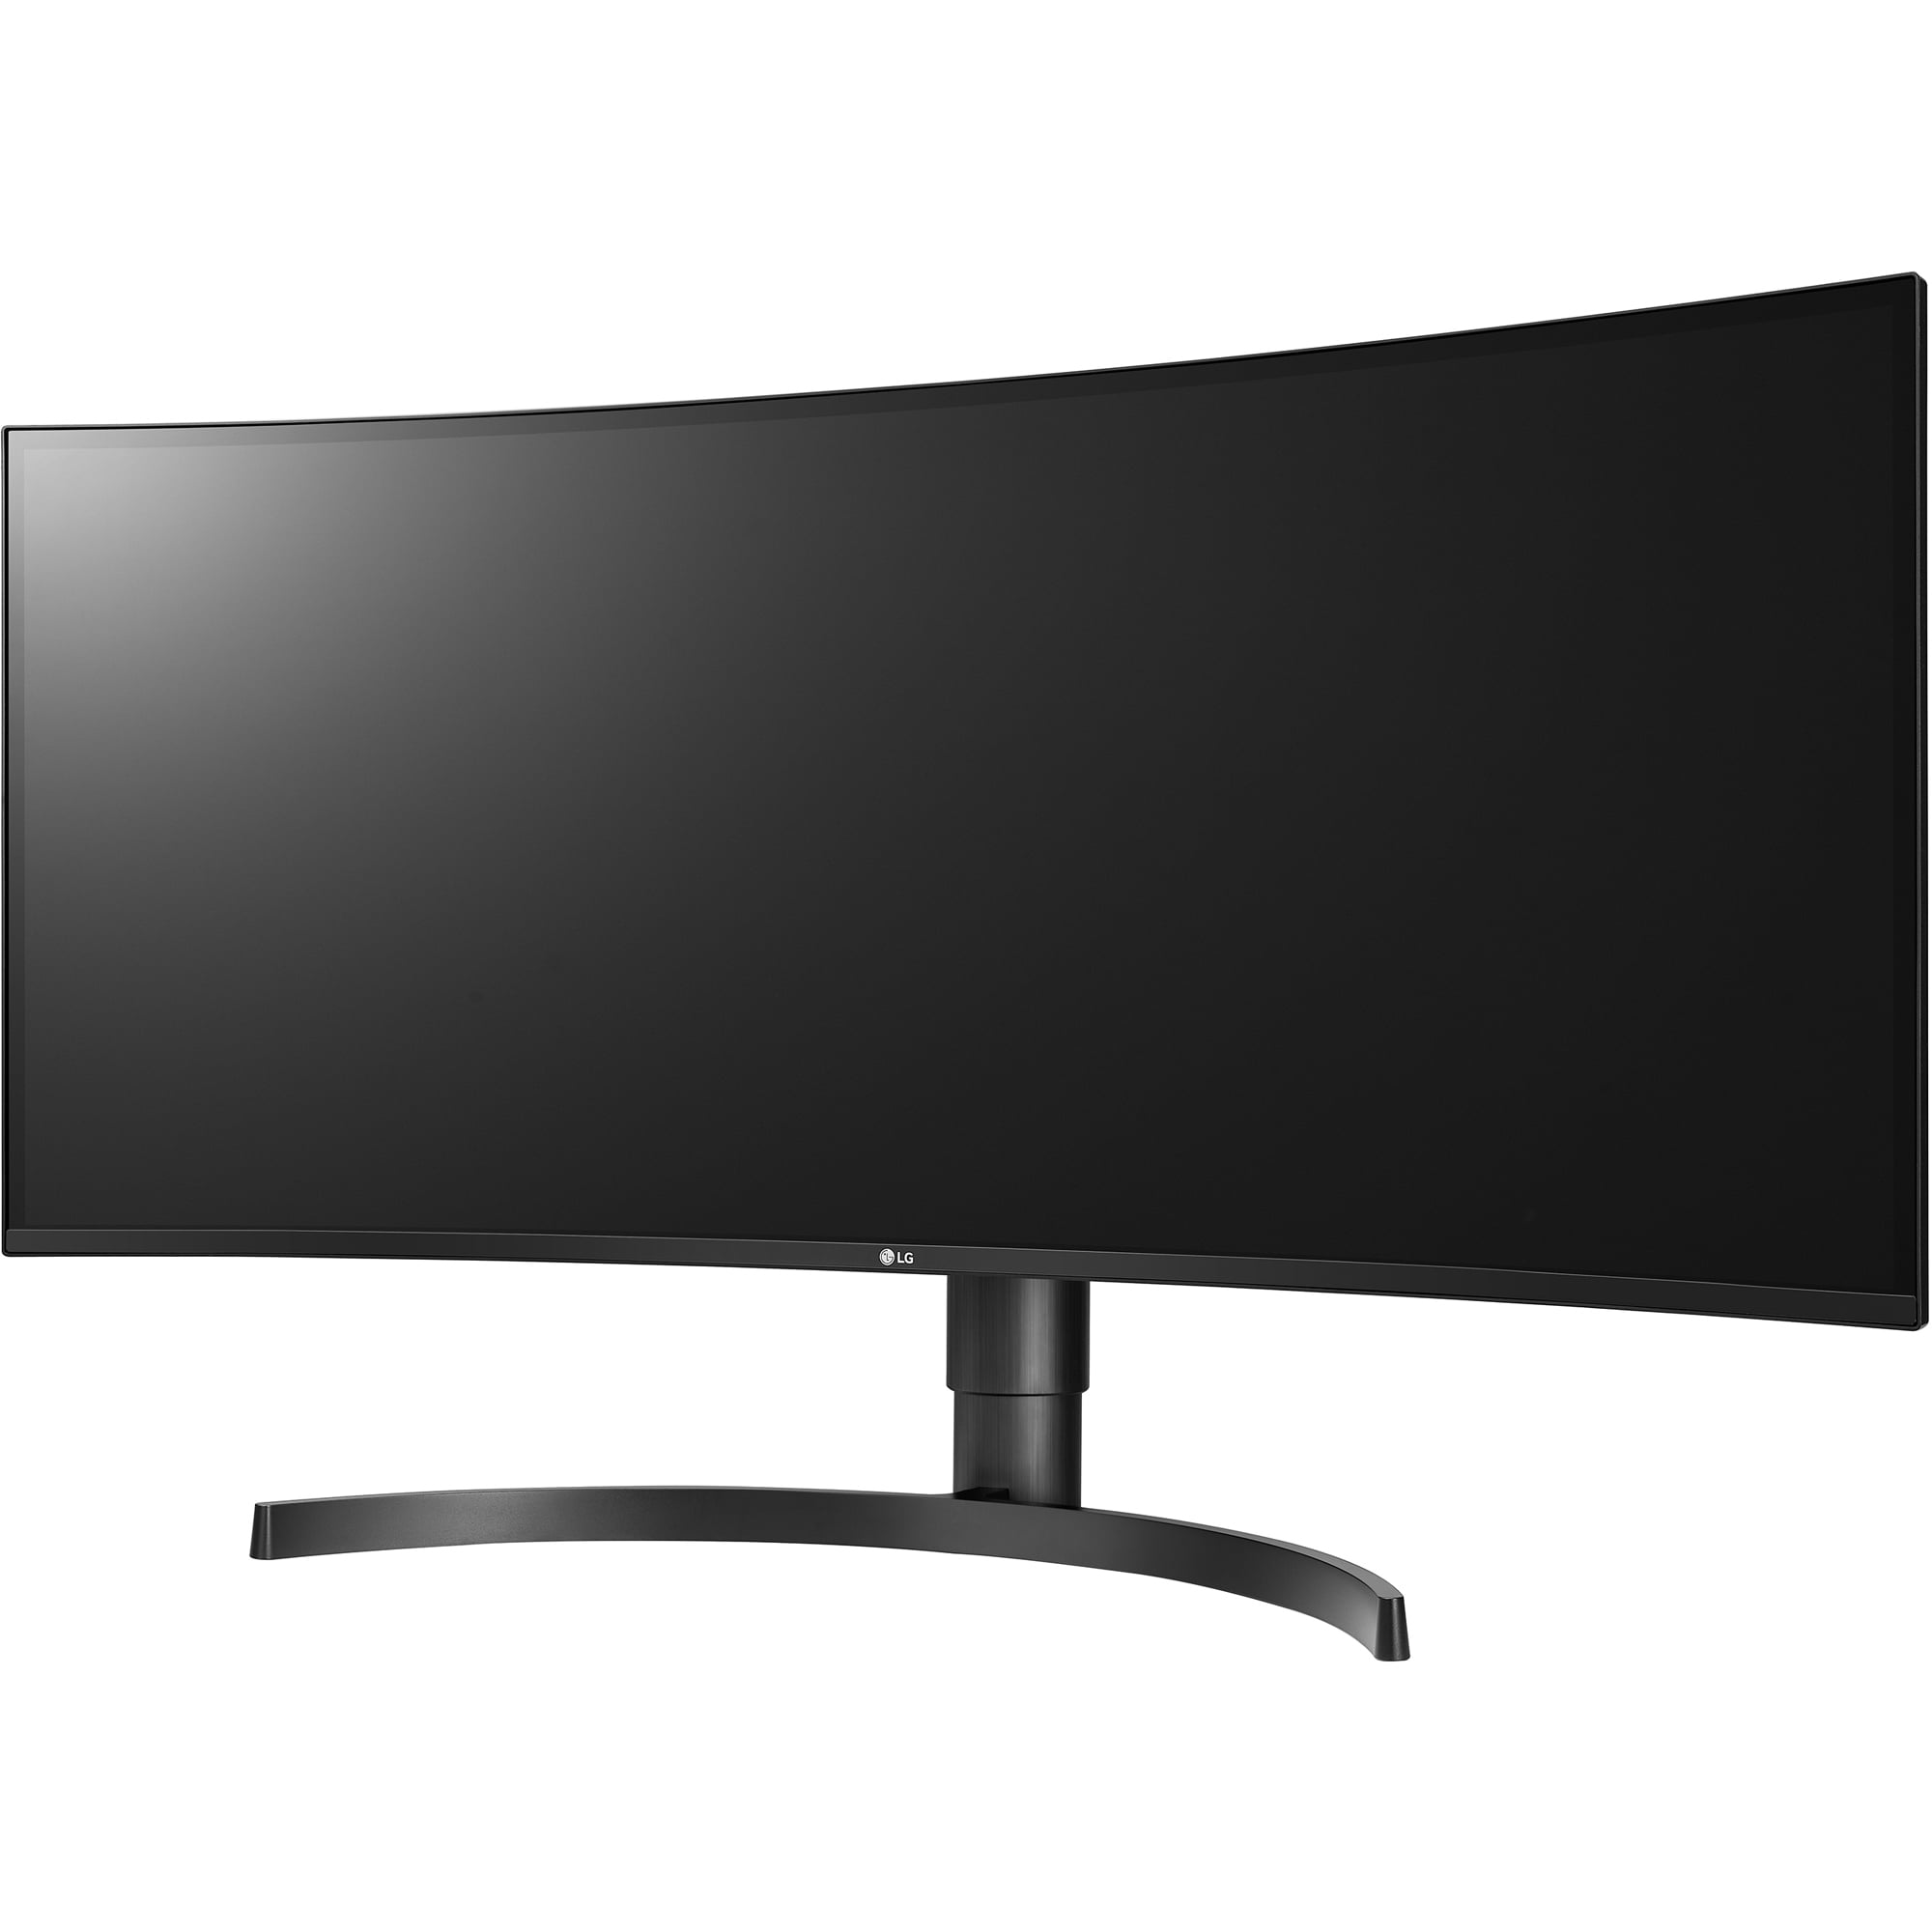 Photo 1 of ***DAMAGED ONE SIDE*** LG 34WN80C-B 34 inch 21:9 Curved UltraWide WQHD IPS Monitor with USB Type-C Connectivity sRGB 99 Color Gamut and HDR10 Compatibility, Black (2019)